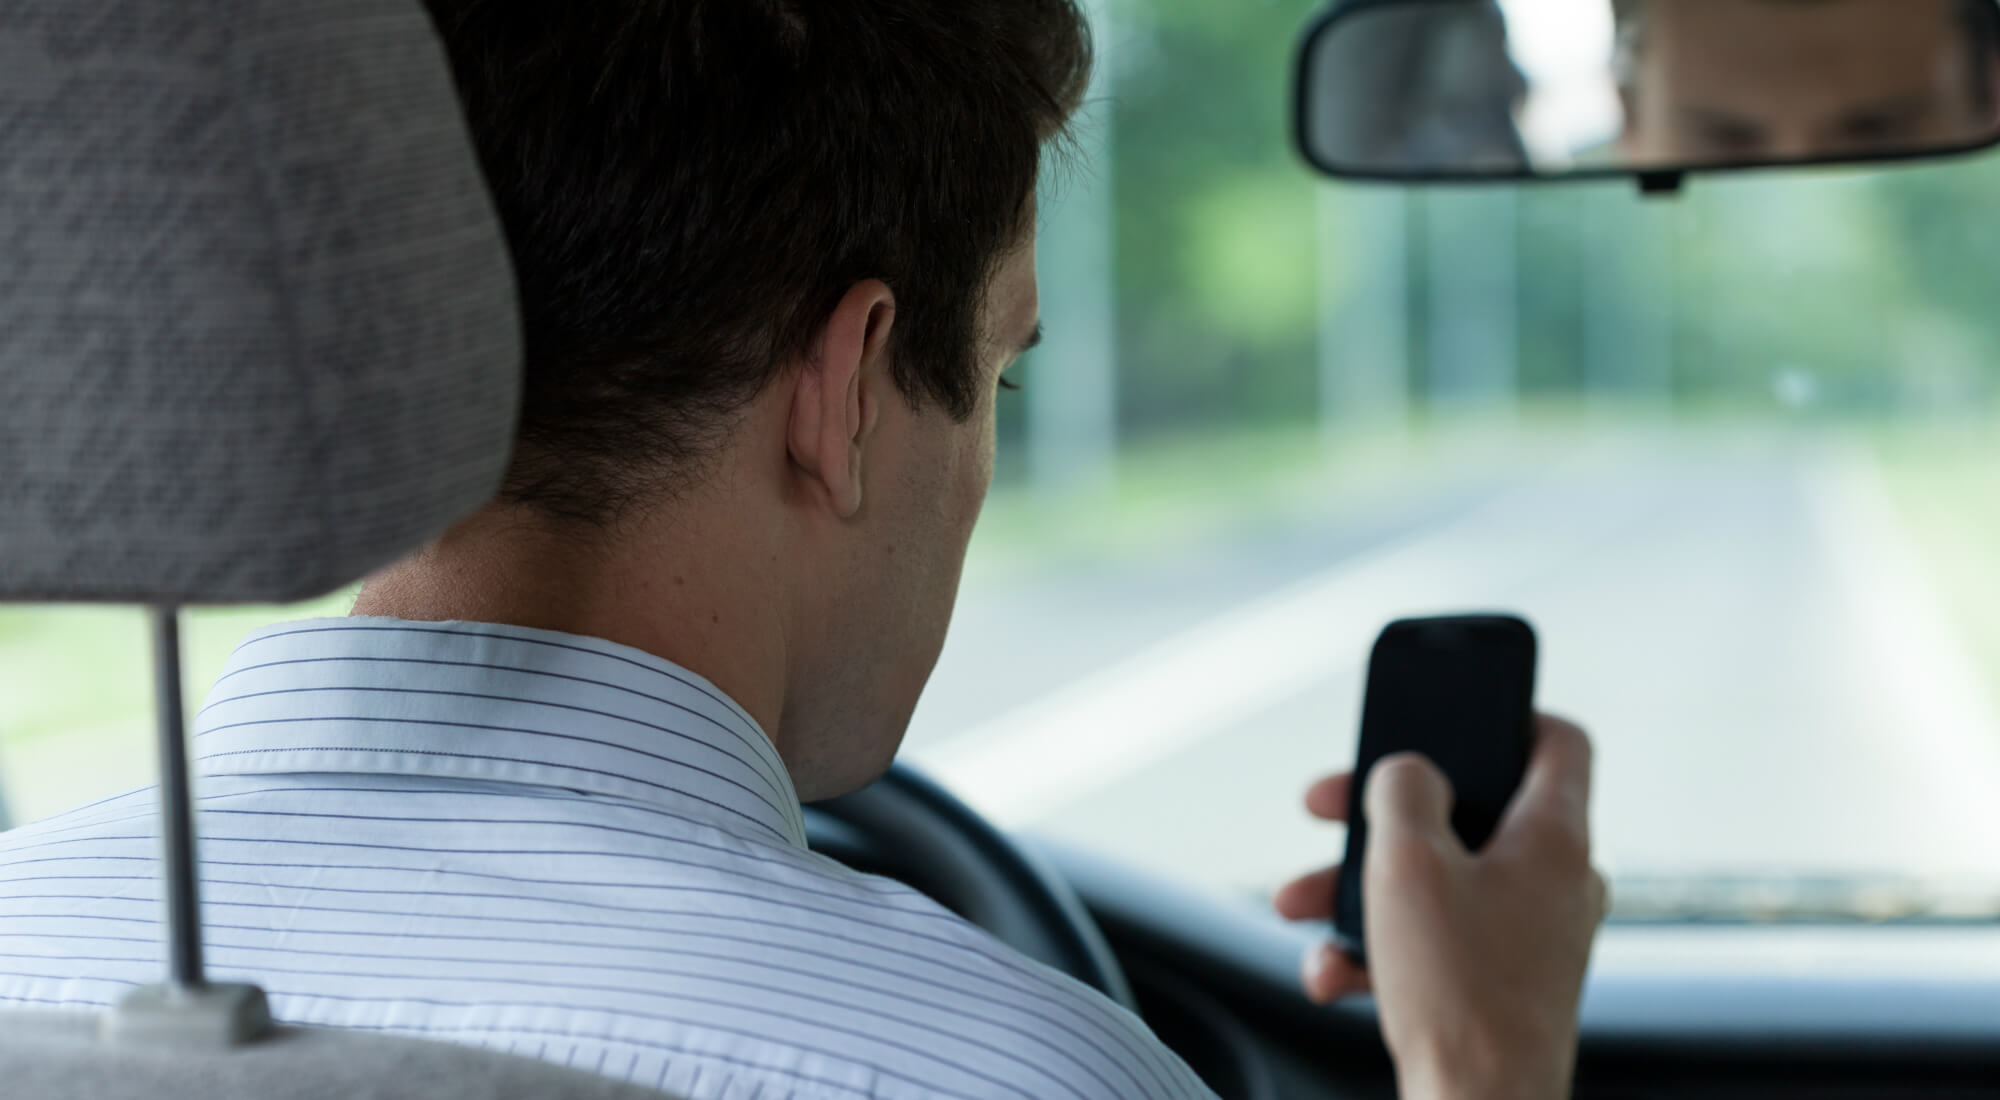 Distracted driver looking at cellphone while driving